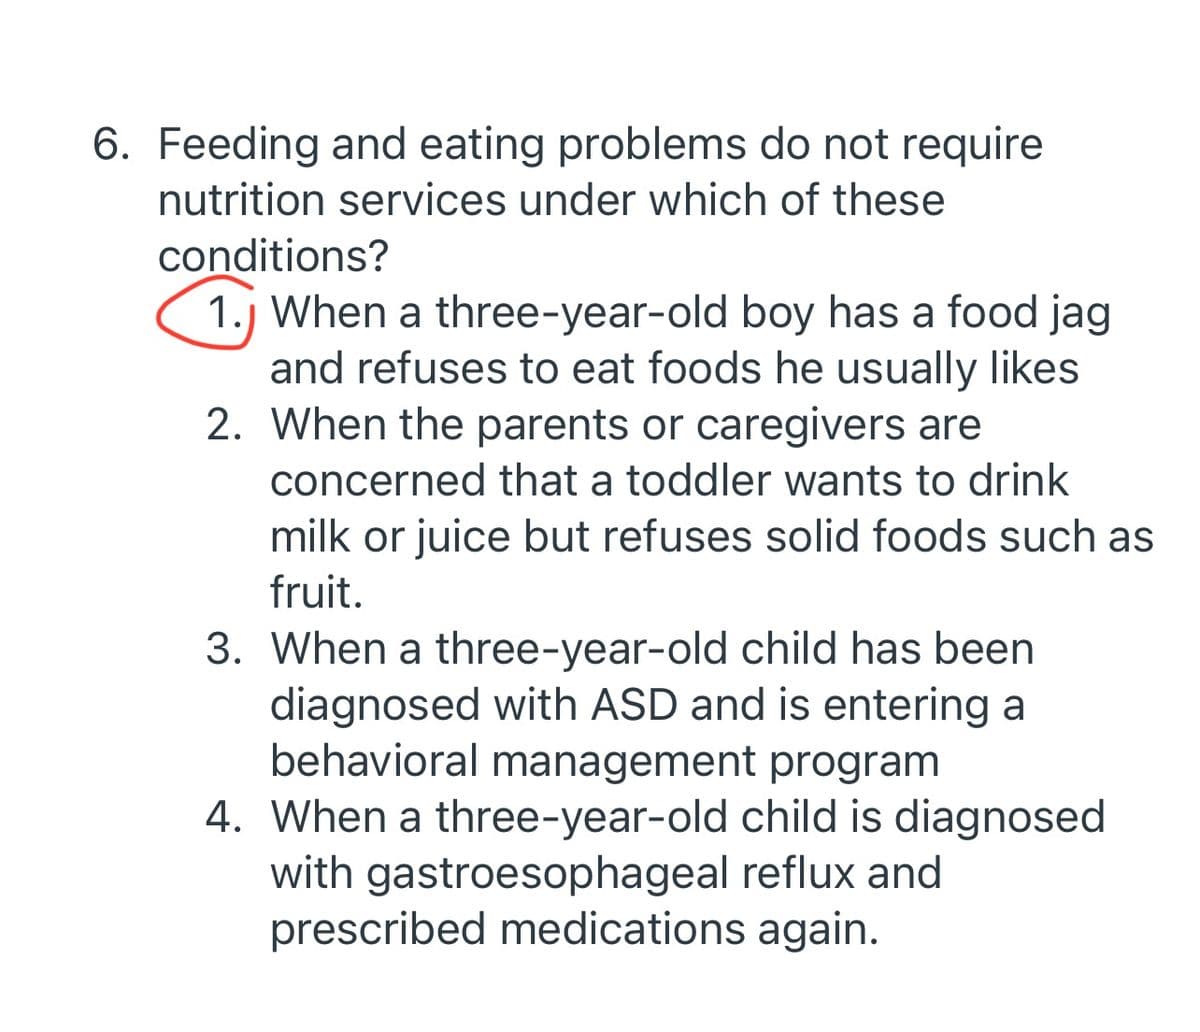 6. Feeding and eating problems do not require
nutrition services under which of these
conditions?
1.) When a three-year-old boy has a food jag
and refuses to eat foods he usually likes
2. When the parents or caregivers are
concerned that a toddler wants to drink
milk or juice but refuses solid foods such as
fruit.
3. When a three-year-old child has been
diagnosed with ASD and is entering a
behavioral management program
4. When a three-year-old child is diagnosed
with gastroesophageal reflux and
prescribed medications again.
